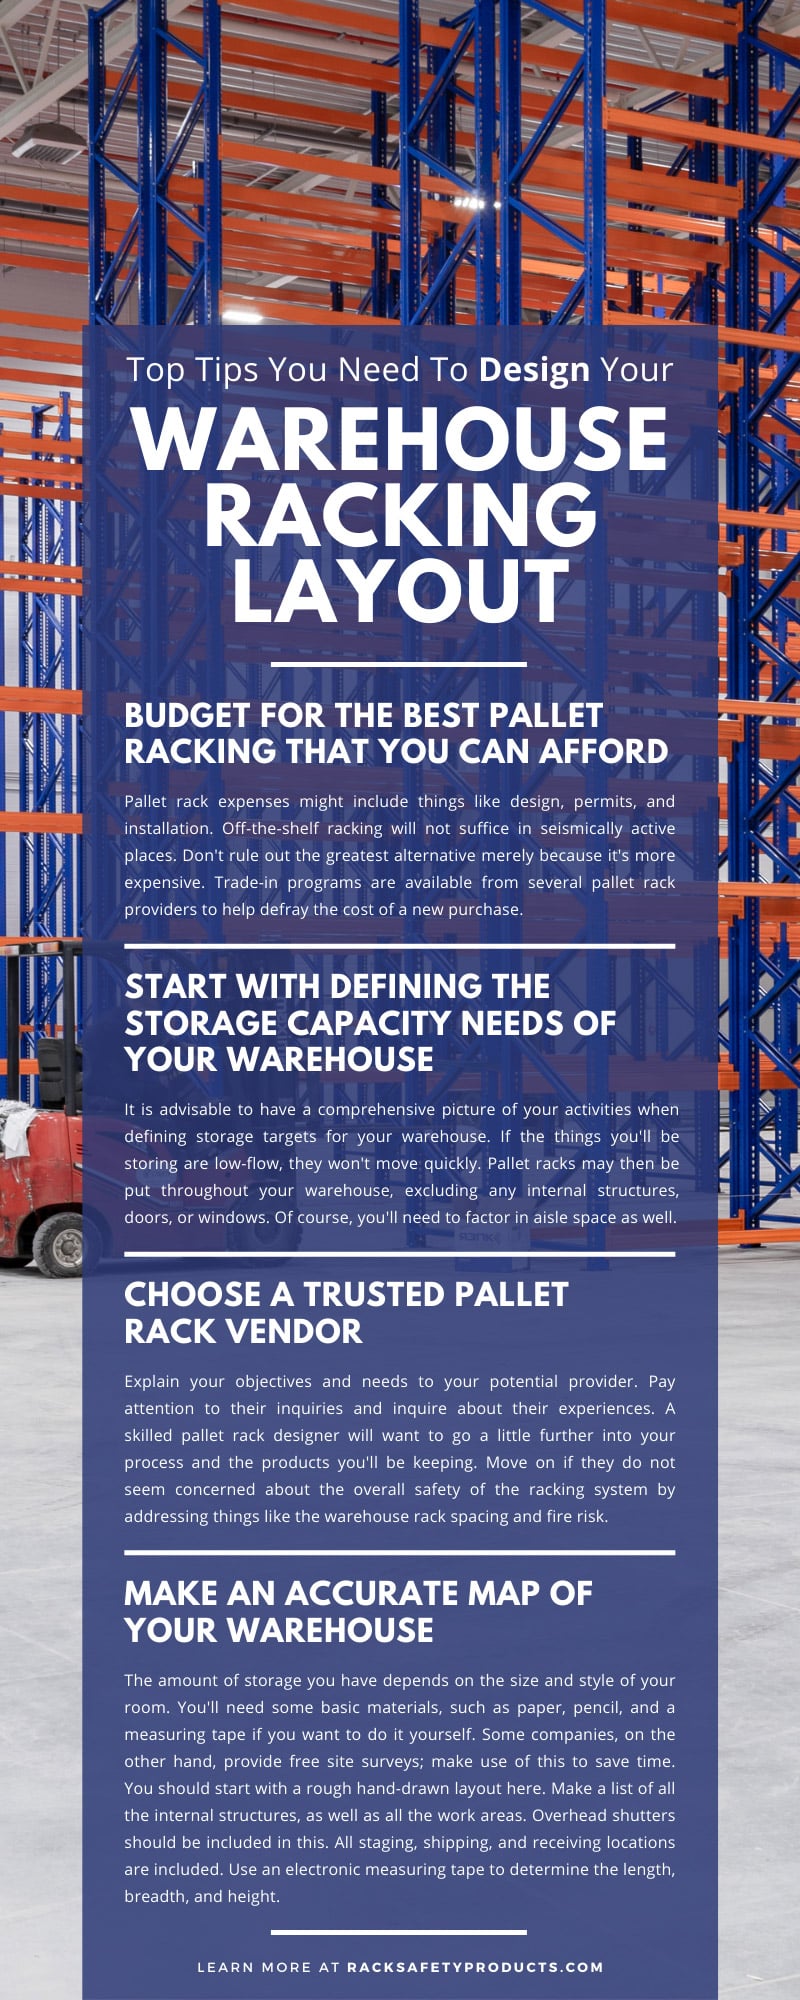 Top Tips You Need To Design Your Warehouse Racking Layout